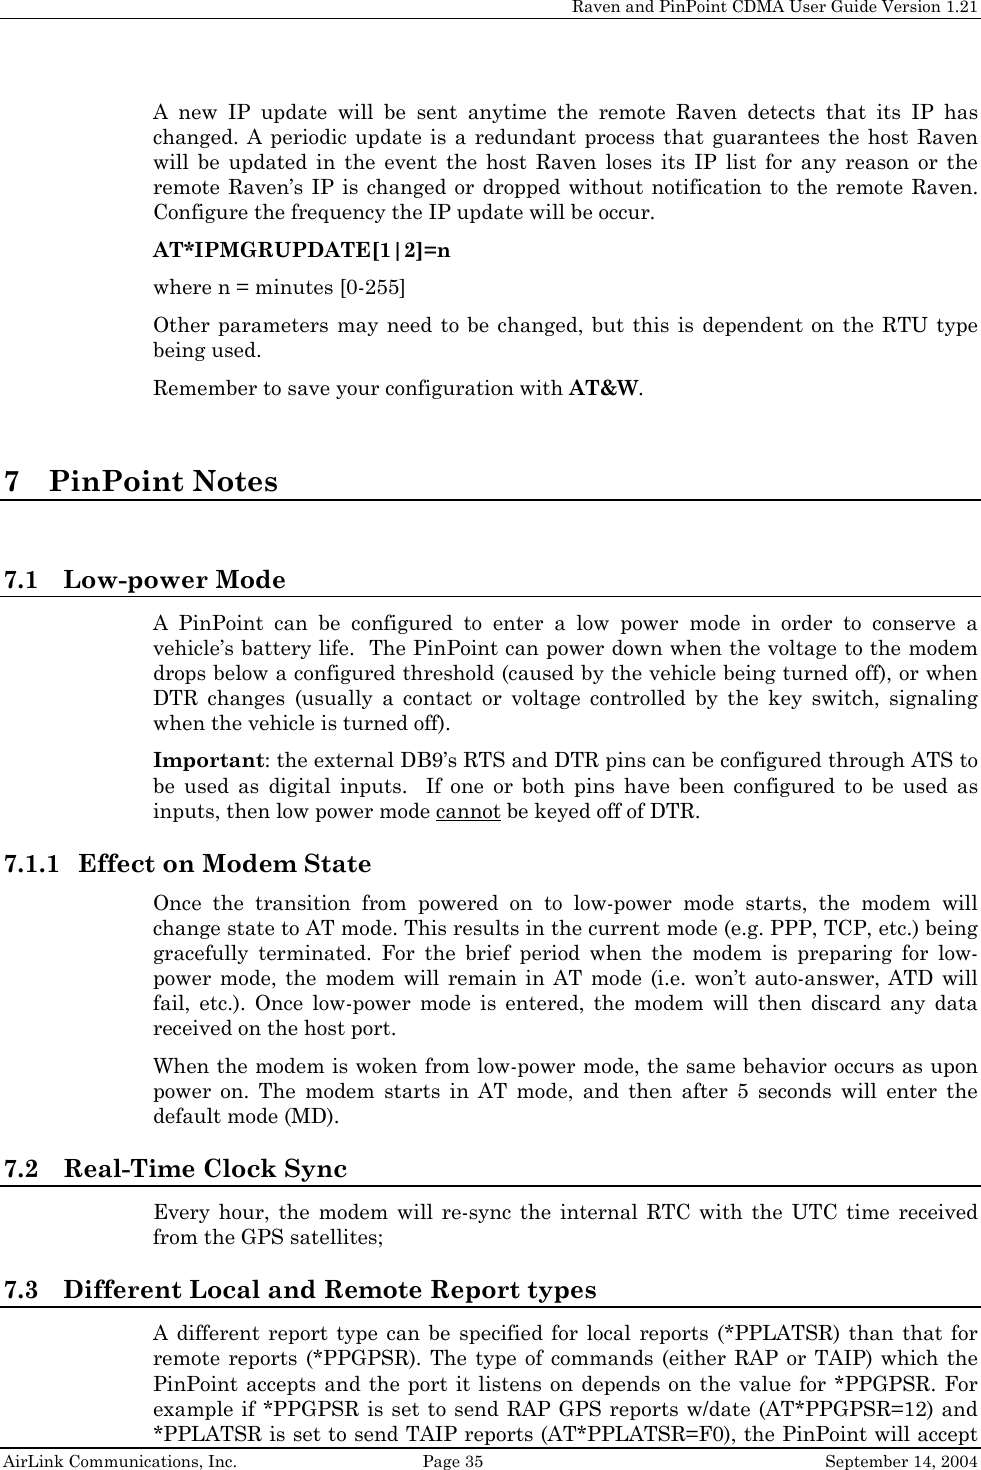     Raven and PinPoint CDMA User Guide Version 1.21  AirLink Communications, Inc.  Page 35  September 14, 2004 A new IP update will be sent anytime the remote Raven detects that its IP has changed. A periodic update is a redundant process that guarantees the host Raven will be updated in the event the host Raven loses its IP list for any reason or the remote Raven’s IP is changed or dropped without notification to the remote Raven. Configure the frequency the IP update will be occur. AT*IPMGRUPDATE[1|2]=n   where n = minutes [0-255] Other parameters may need to be changed, but this is dependent on the RTU type being used. Remember to save your configuration with AT&amp;W.  7 PinPoint Notes  7.1 Low-power Mode A PinPoint can be configured to enter a low power mode in order to conserve a vehicle’s battery life.  The PinPoint can power down when the voltage to the modem drops below a configured threshold (caused by the vehicle being turned off), or when DTR changes (usually a contact or voltage controlled by the key switch, signaling when the vehicle is turned off). Important: the external DB9’s RTS and DTR pins can be configured through ATS to be used as digital inputs.  If one or both pins have been configured to be used as inputs, then low power mode cannot be keyed off of DTR. 7.1.1 Effect on Modem State Once the transition from powered on to low-power mode starts, the modem will change state to AT mode. This results in the current mode (e.g. PPP, TCP, etc.) being gracefully terminated. For the brief period when the modem is preparing for low-power mode, the modem will remain in AT mode (i.e. won’t auto-answer, ATD will fail, etc.). Once low-power mode is entered, the modem will then discard any data received on the host port. When the modem is woken from low-power mode, the same behavior occurs as upon power on. The modem starts in AT mode, and then after 5 seconds will enter the default mode (MD). 7.2 Real-Time Clock Sync Every hour, the modem will re-sync the internal RTC with the UTC time received from the GPS satellites; 7.3 Different Local and Remote Report types A different report type can be specified for local reports (*PPLATSR) than that for remote reports (*PPGPSR). The type of commands (either RAP or TAIP) which the PinPoint accepts and the port it listens on depends on the value for *PPGPSR. For example if *PPGPSR is set to send RAP GPS reports w/date (AT*PPGPSR=12) and *PPLATSR is set to send TAIP reports (AT*PPLATSR=F0), the PinPoint will accept 